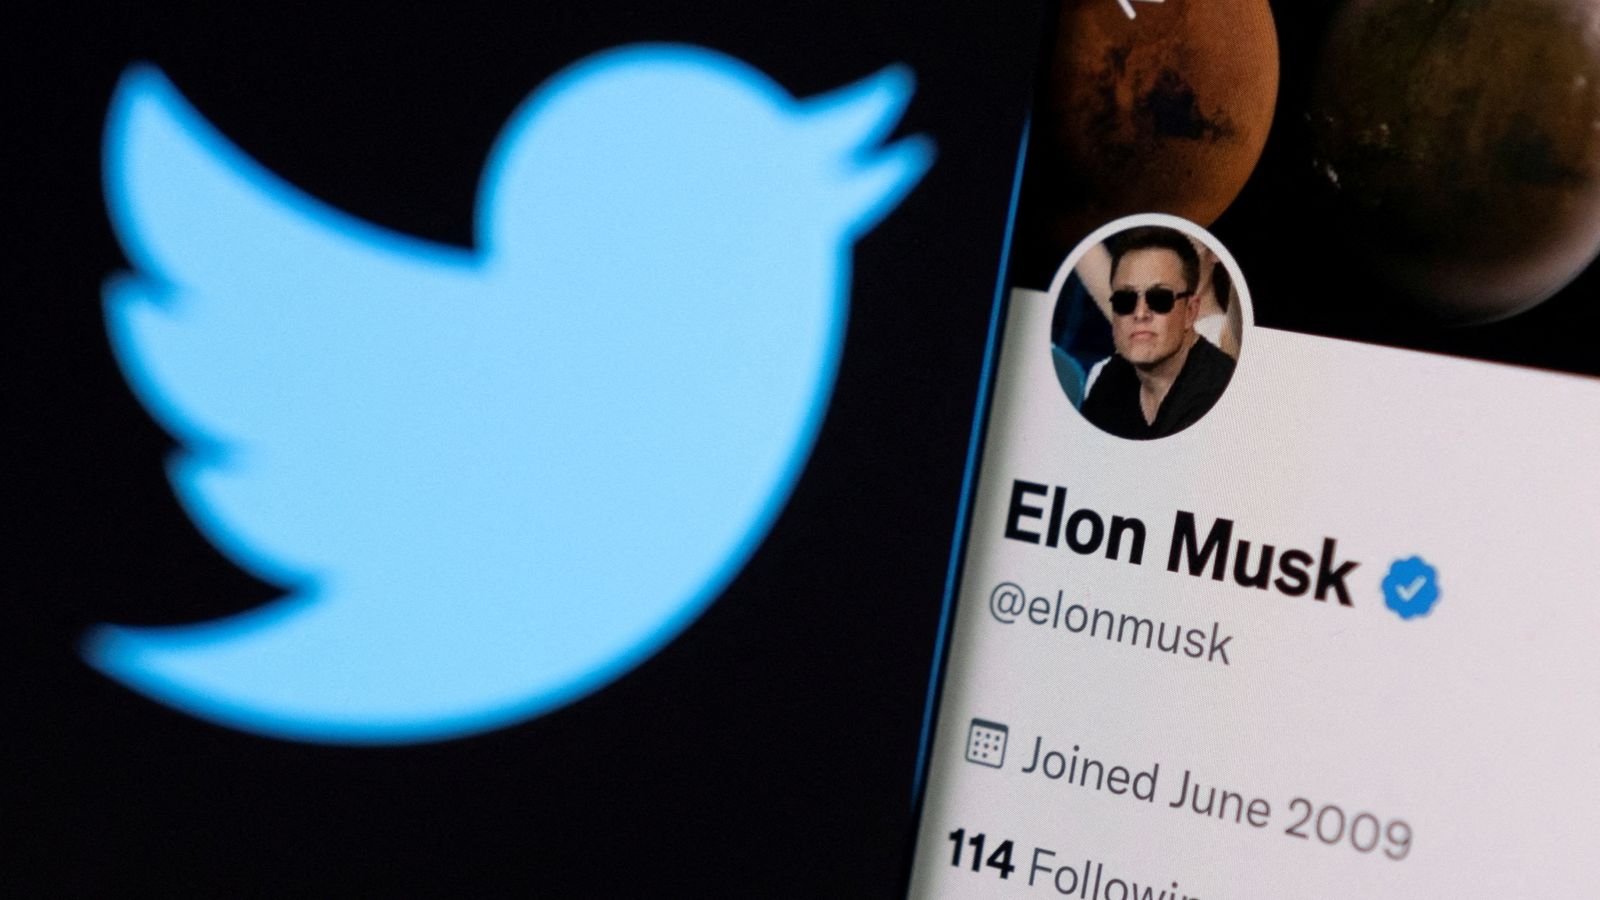 Elon Musk says Twitter takeover deal ‘temporarily on hold’